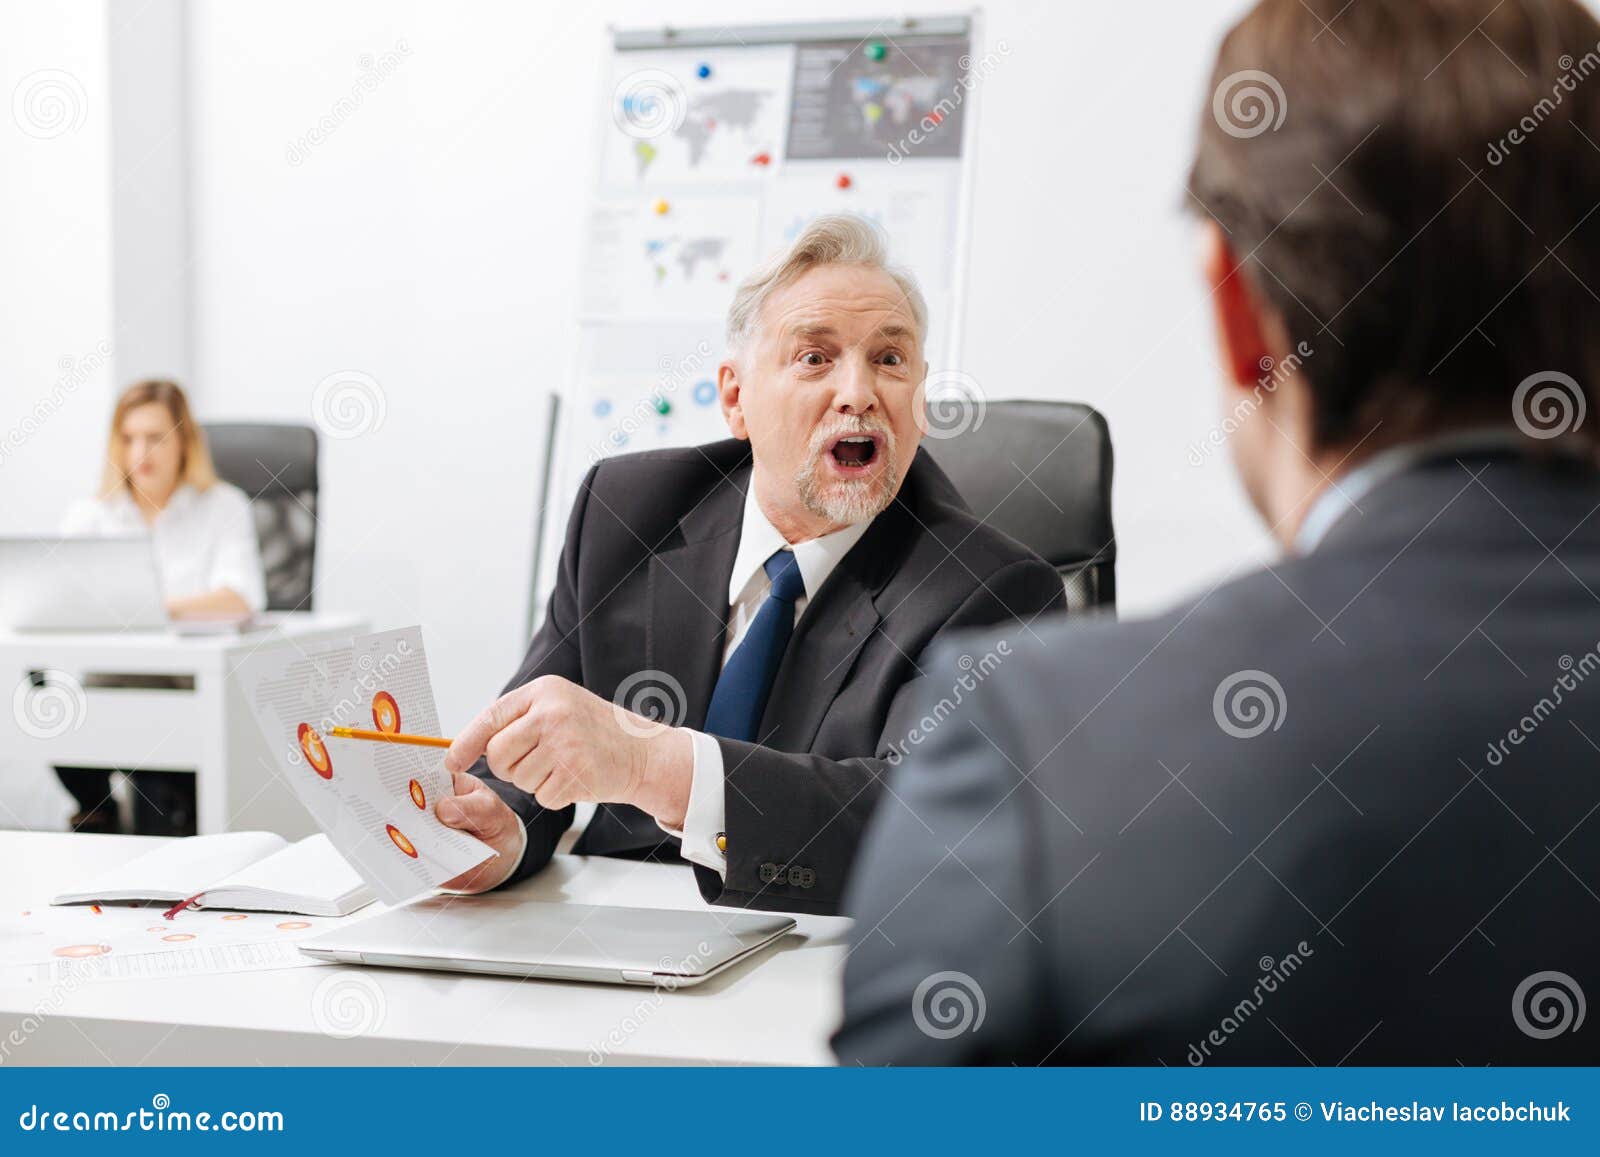 angry-employer-expressing-fierce-office-full-negative-furious-sitting-having-conversation-employee-anger-88934765.jpg